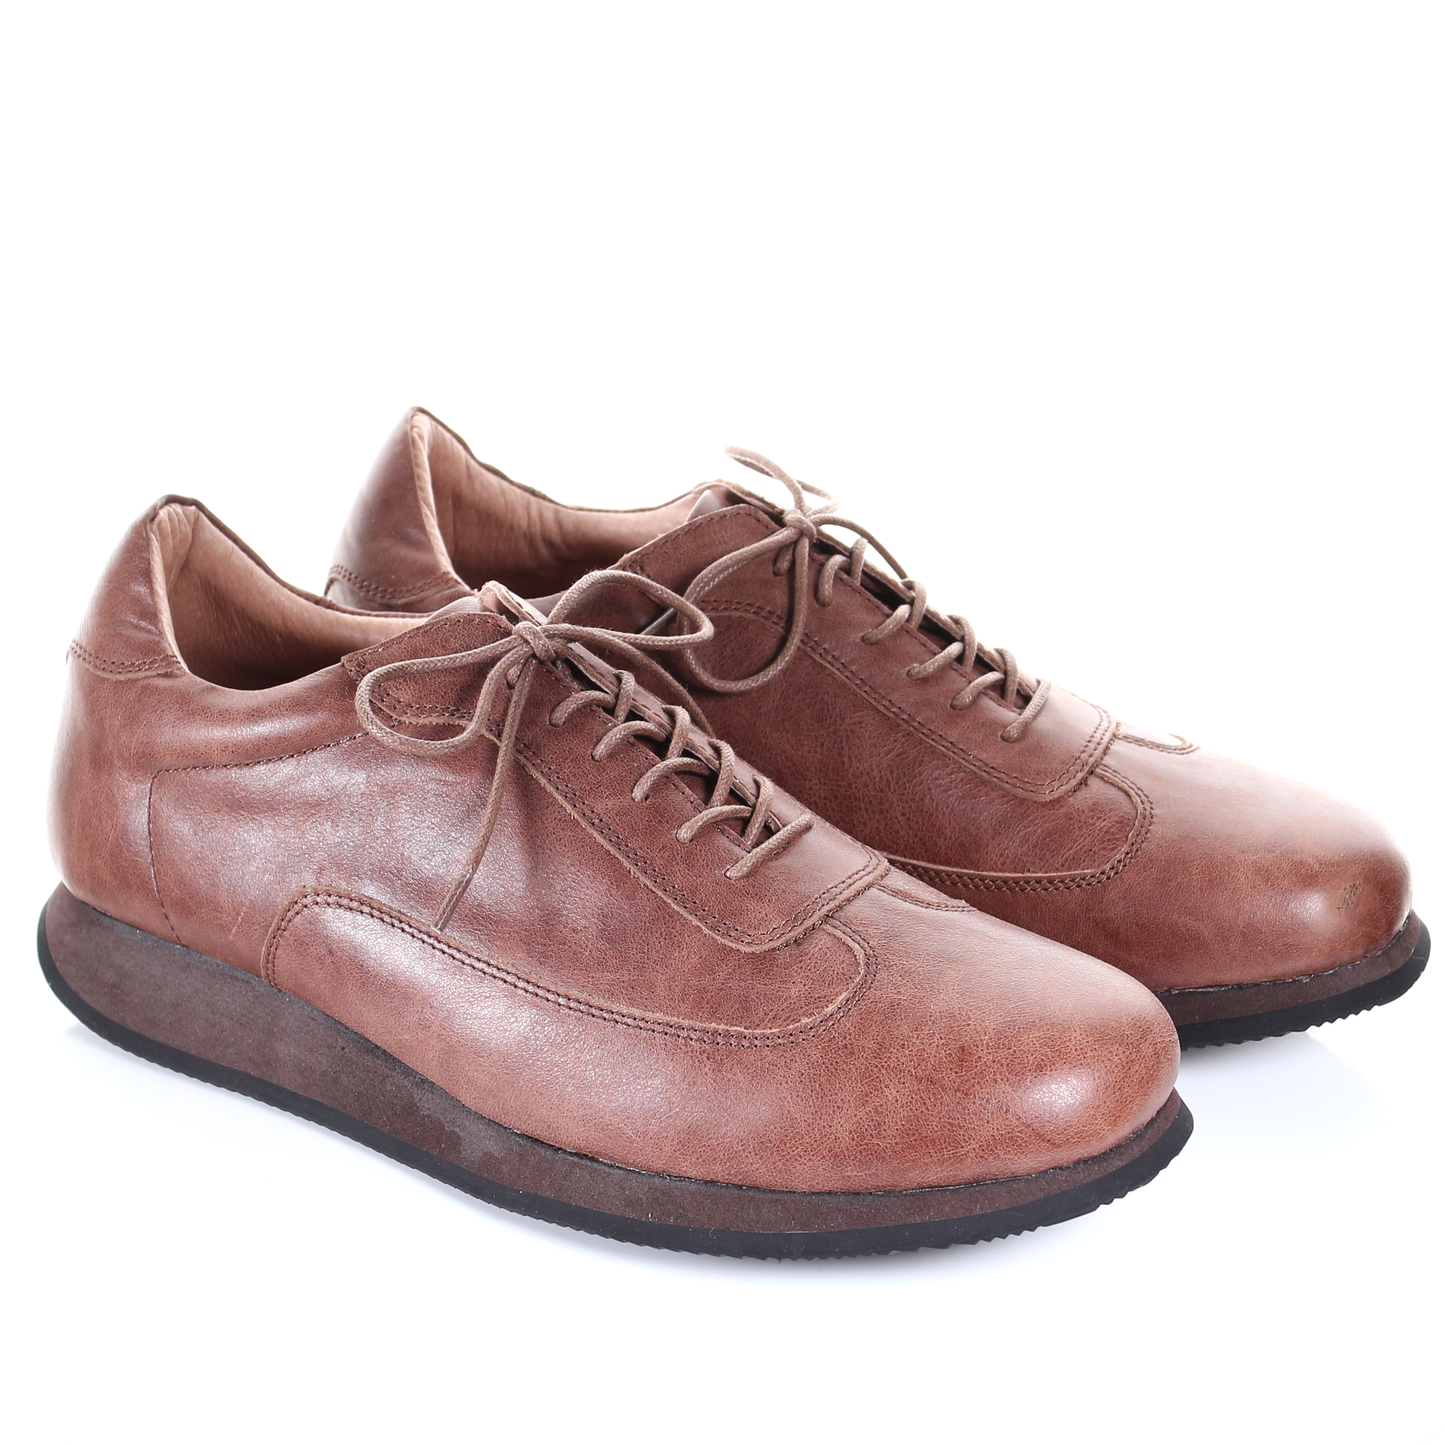 Men's Style Lace Up Leather Casual Shoes (Dark Brown)